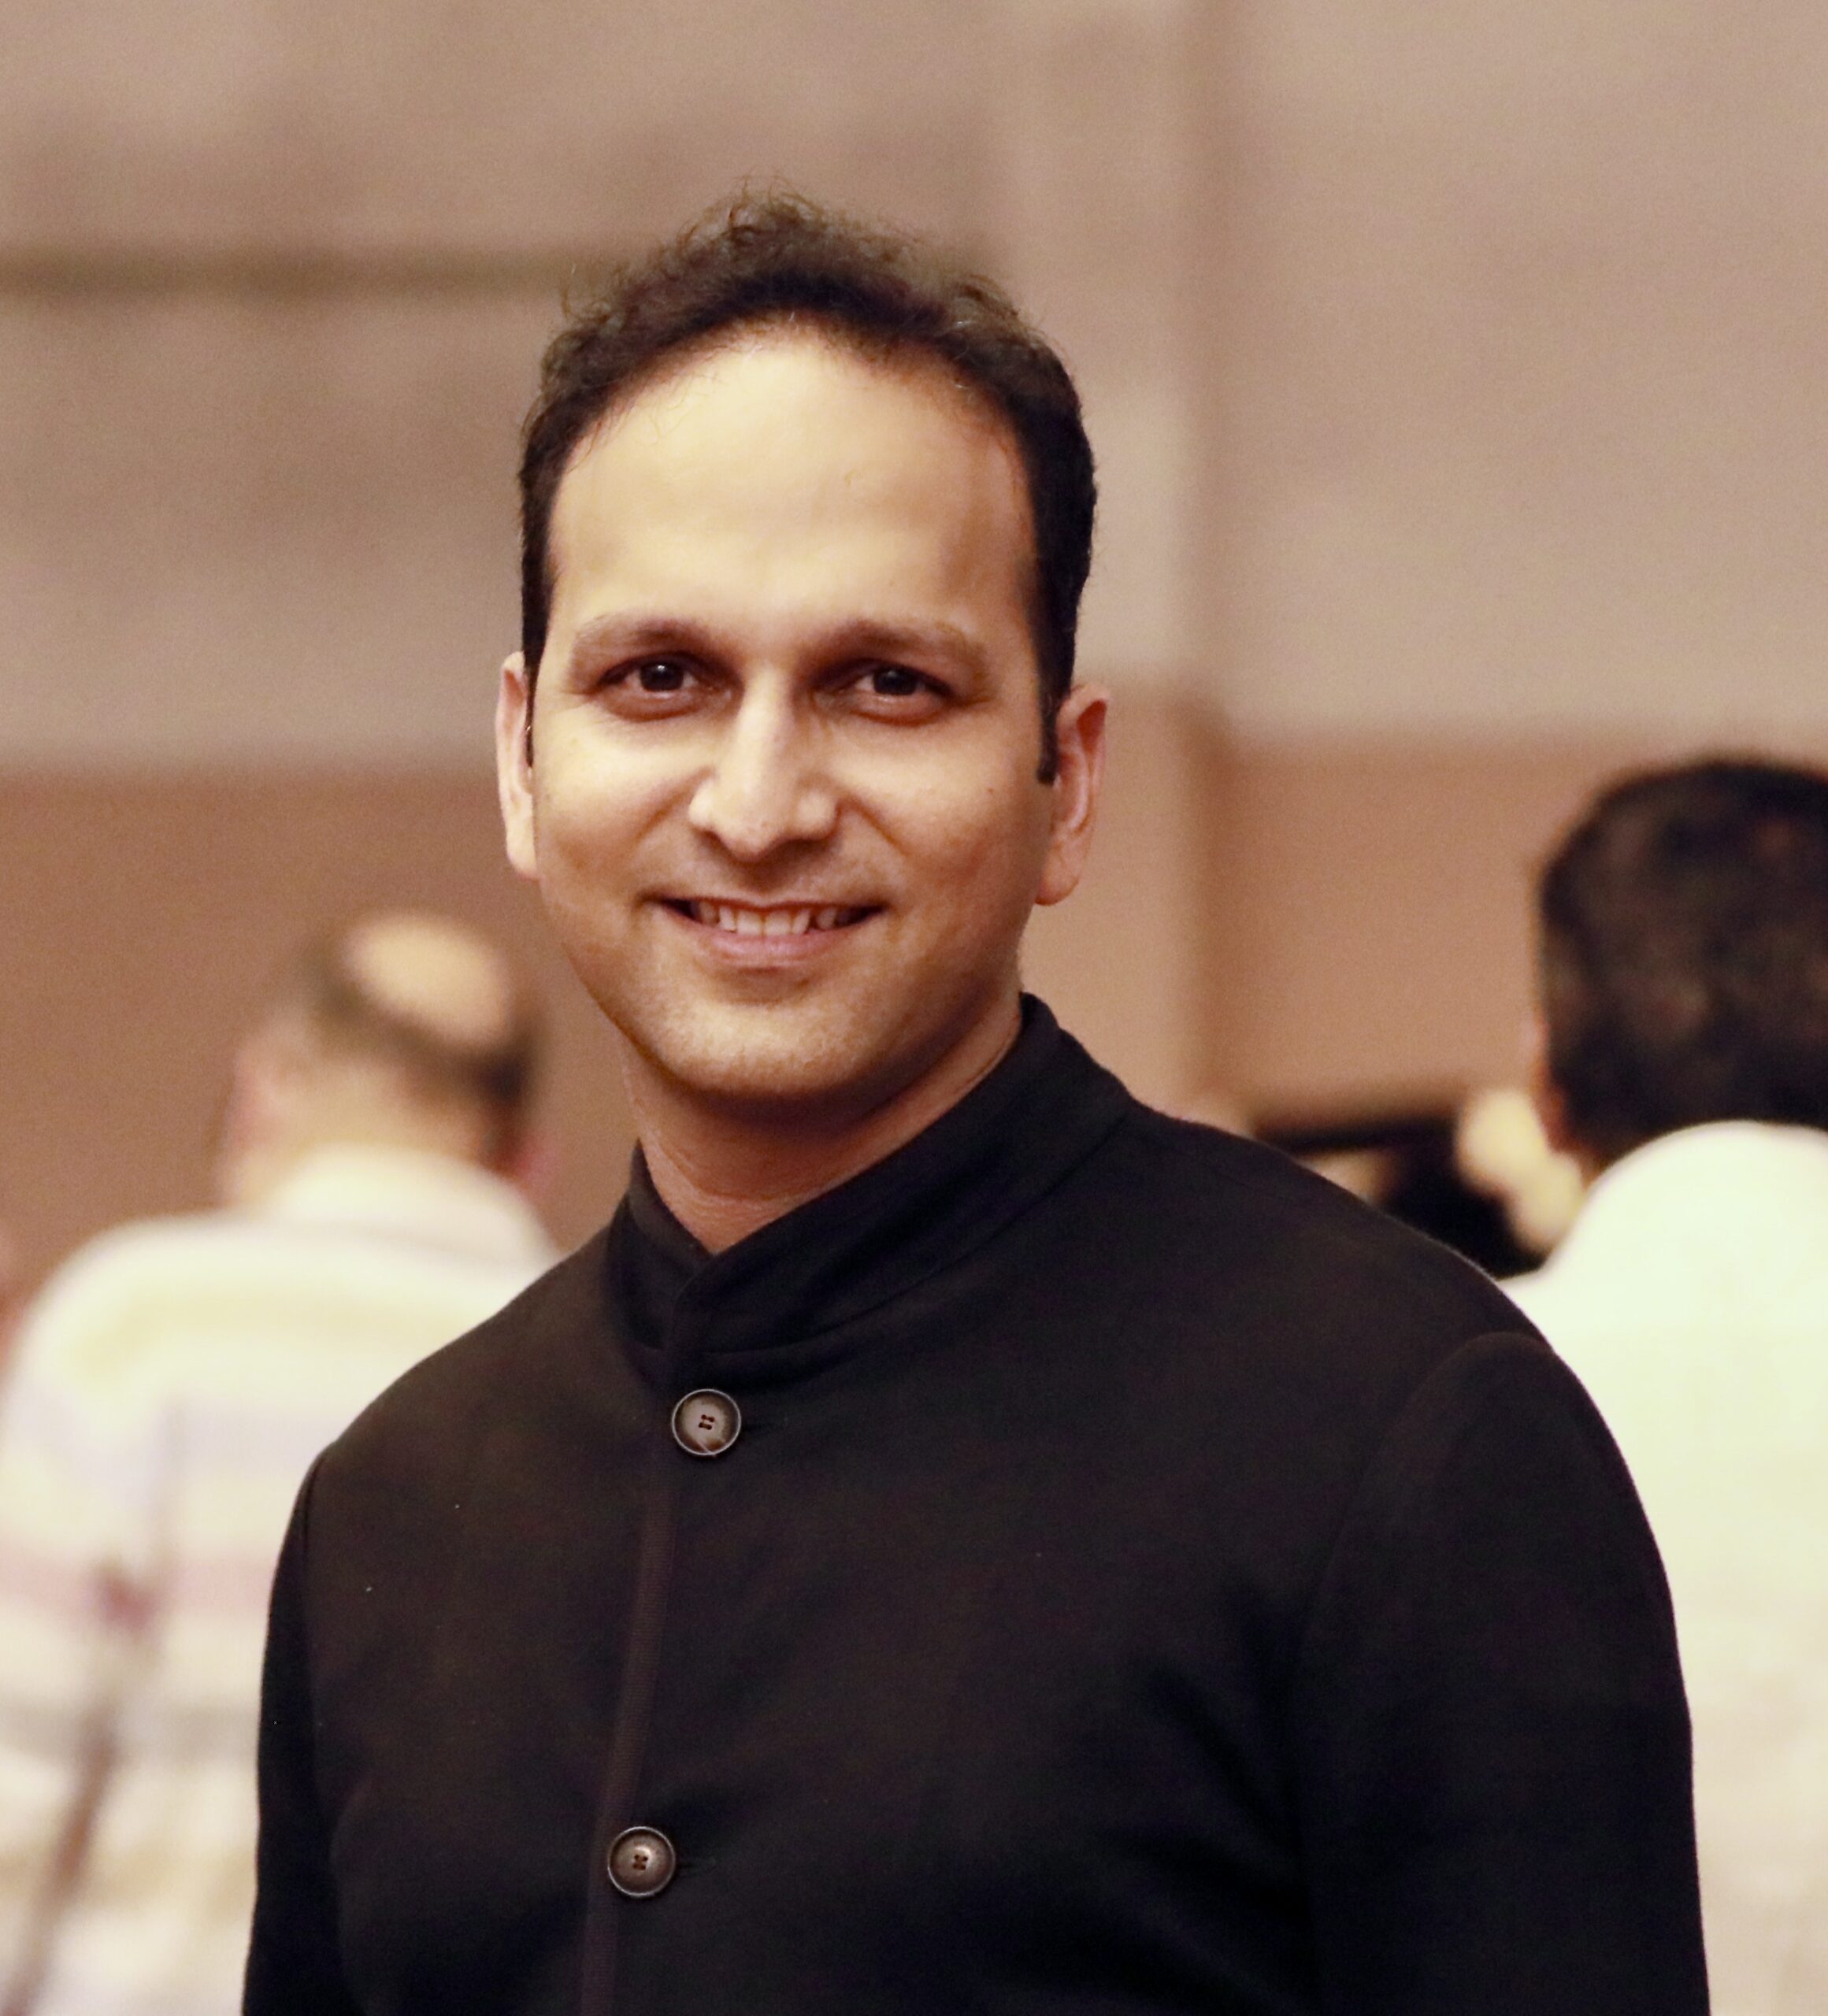 Cleartrip Appoints Anuj Rathi as its Chief Business and Growth Officer